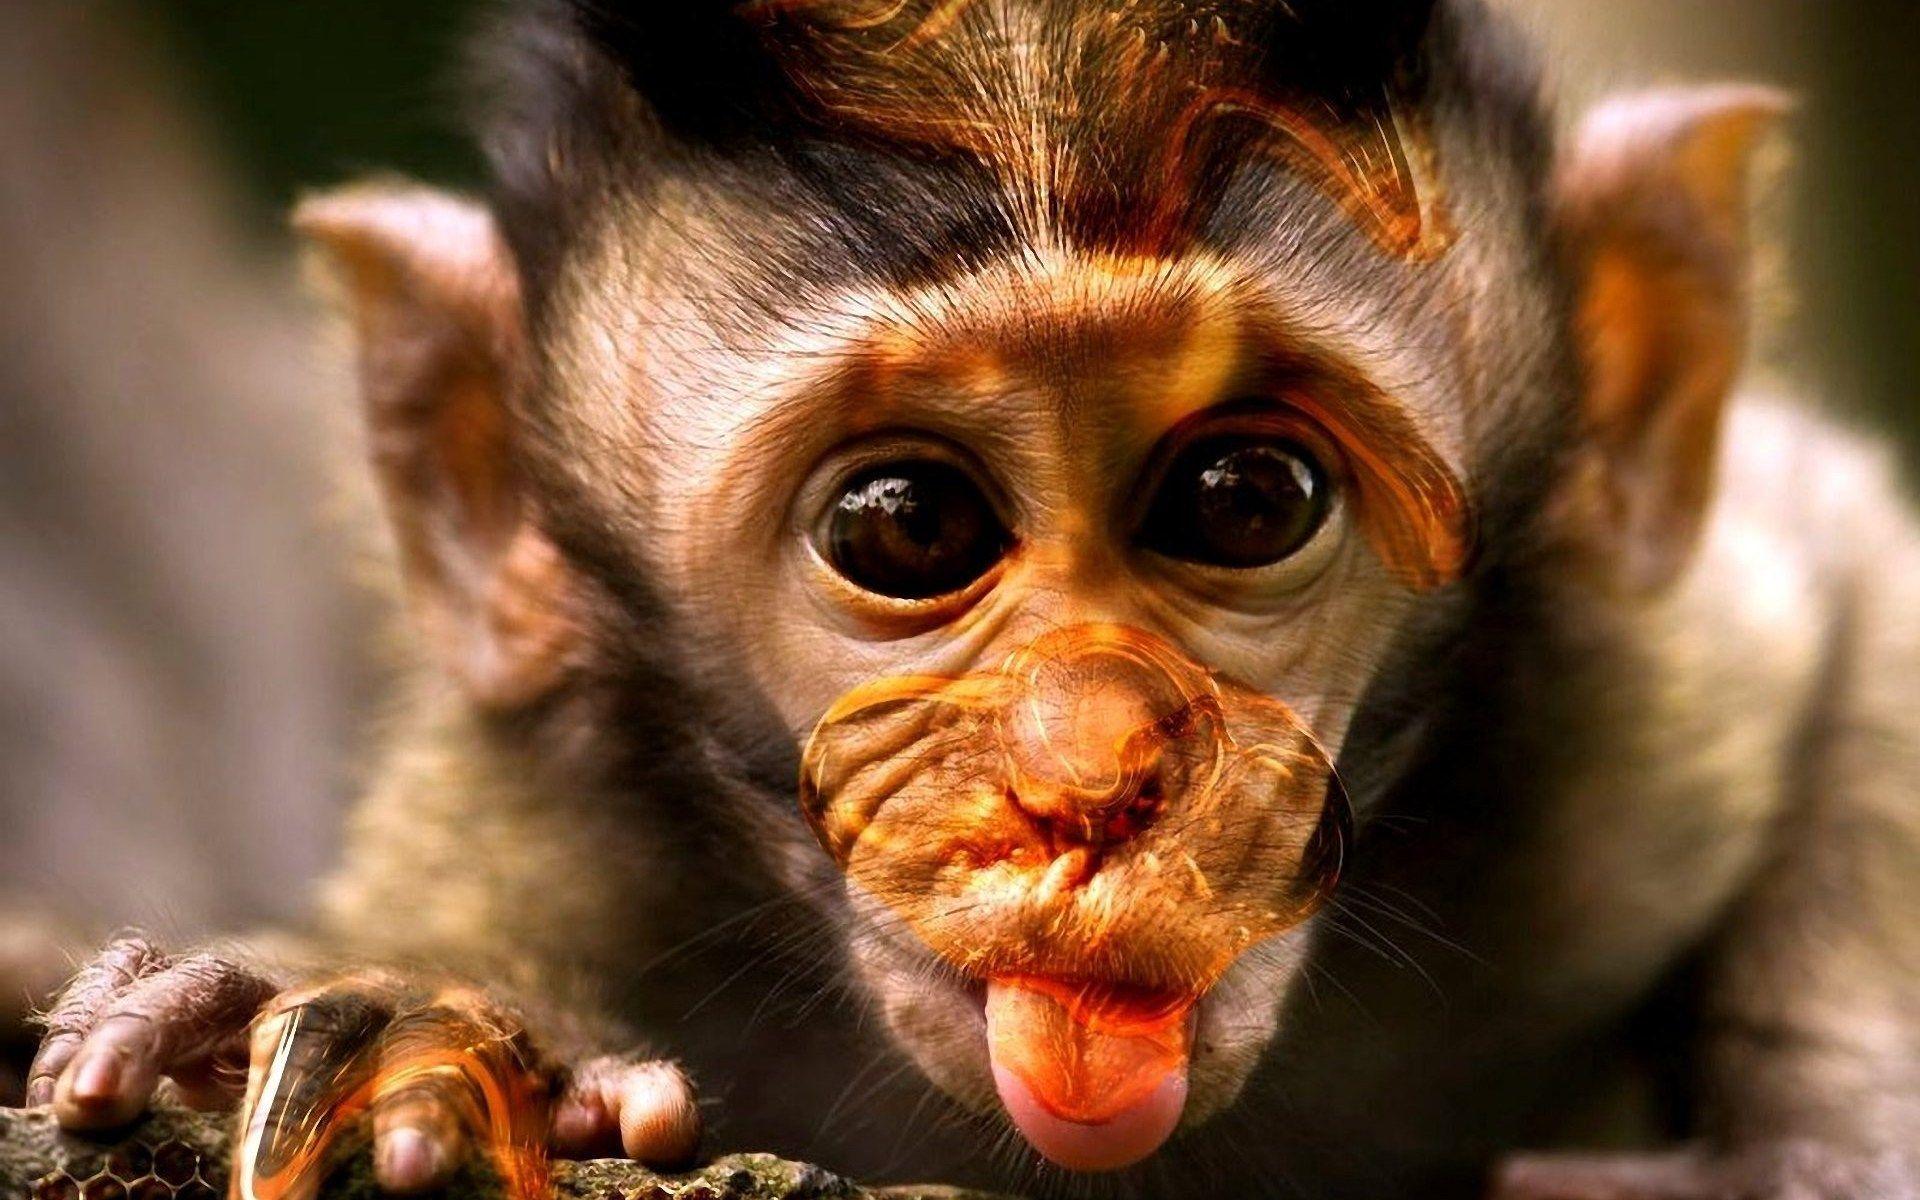 Funny Monkey Pictures Wallpapers - WallpaperSafari